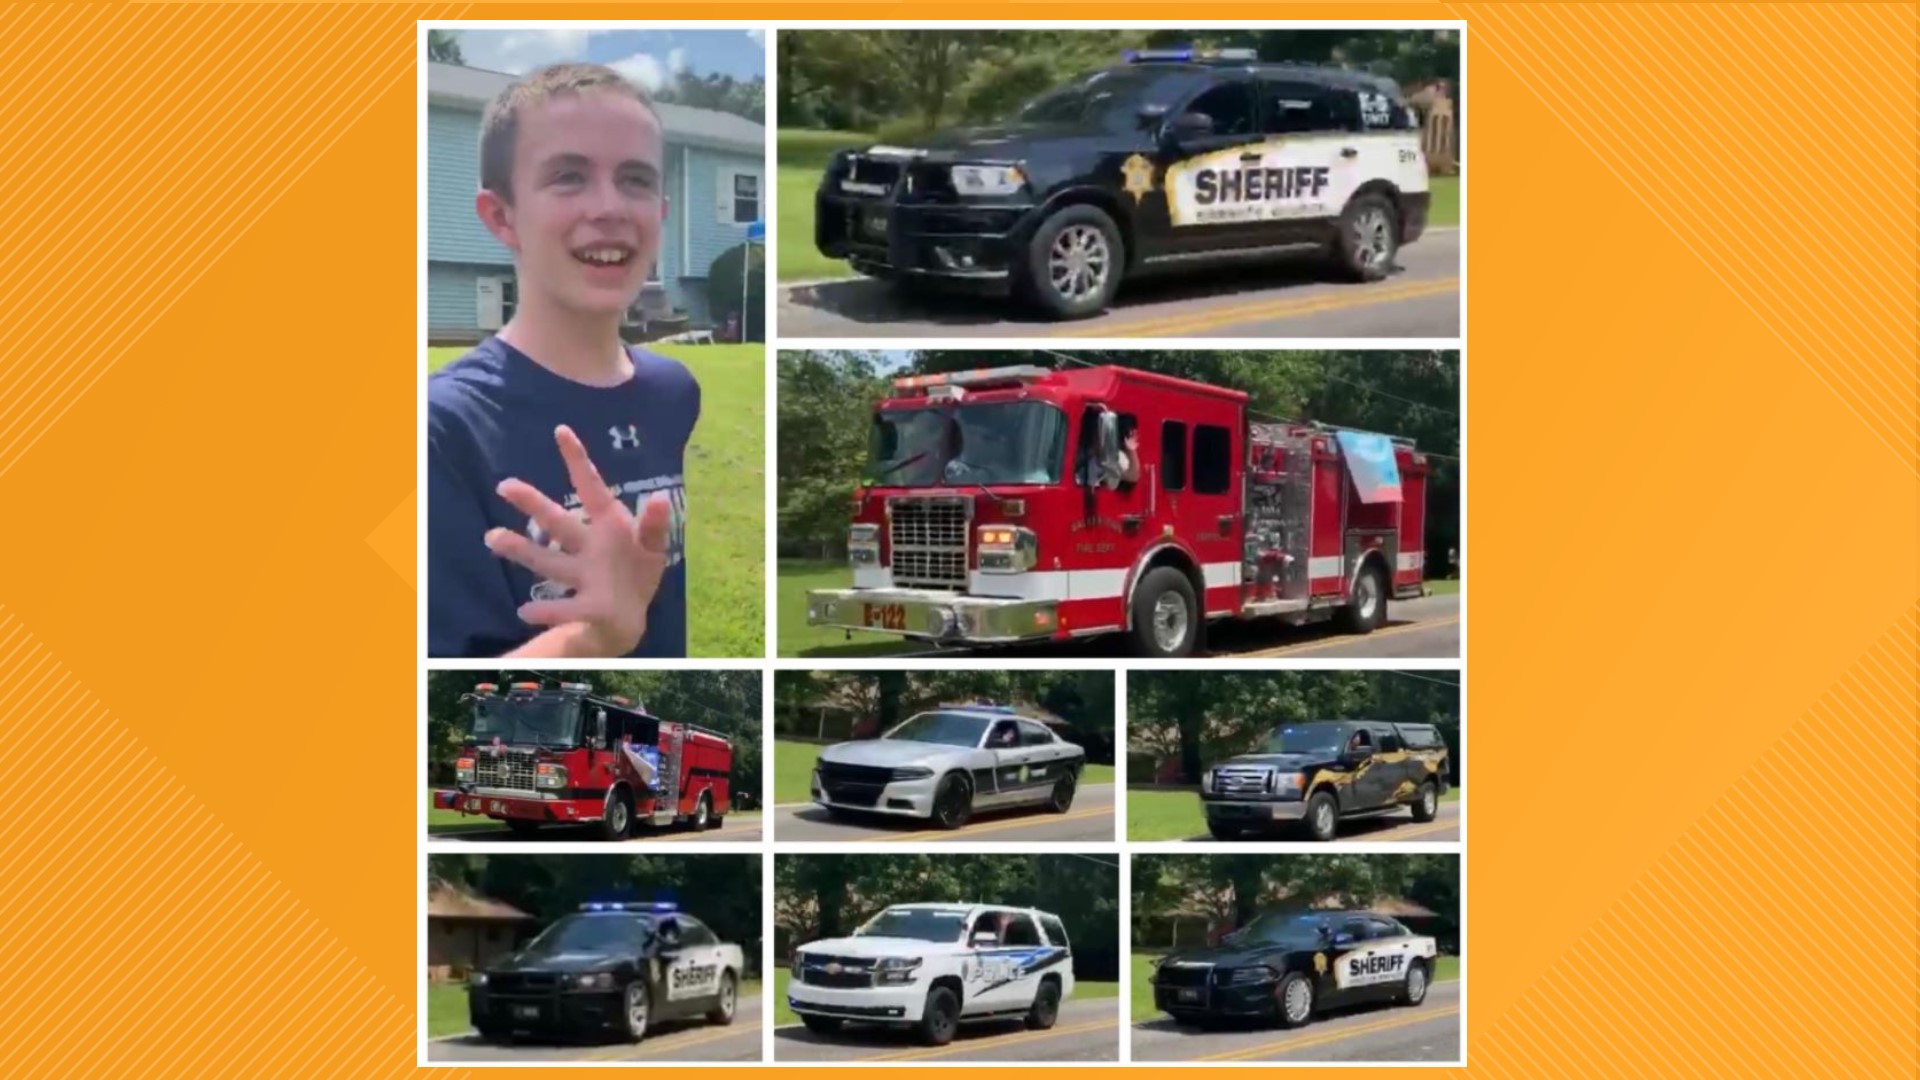 Timothy Tolley who has autism received a big birthday celebration thanks to local law enforcement, firefighters and the East Forsyth High football team.